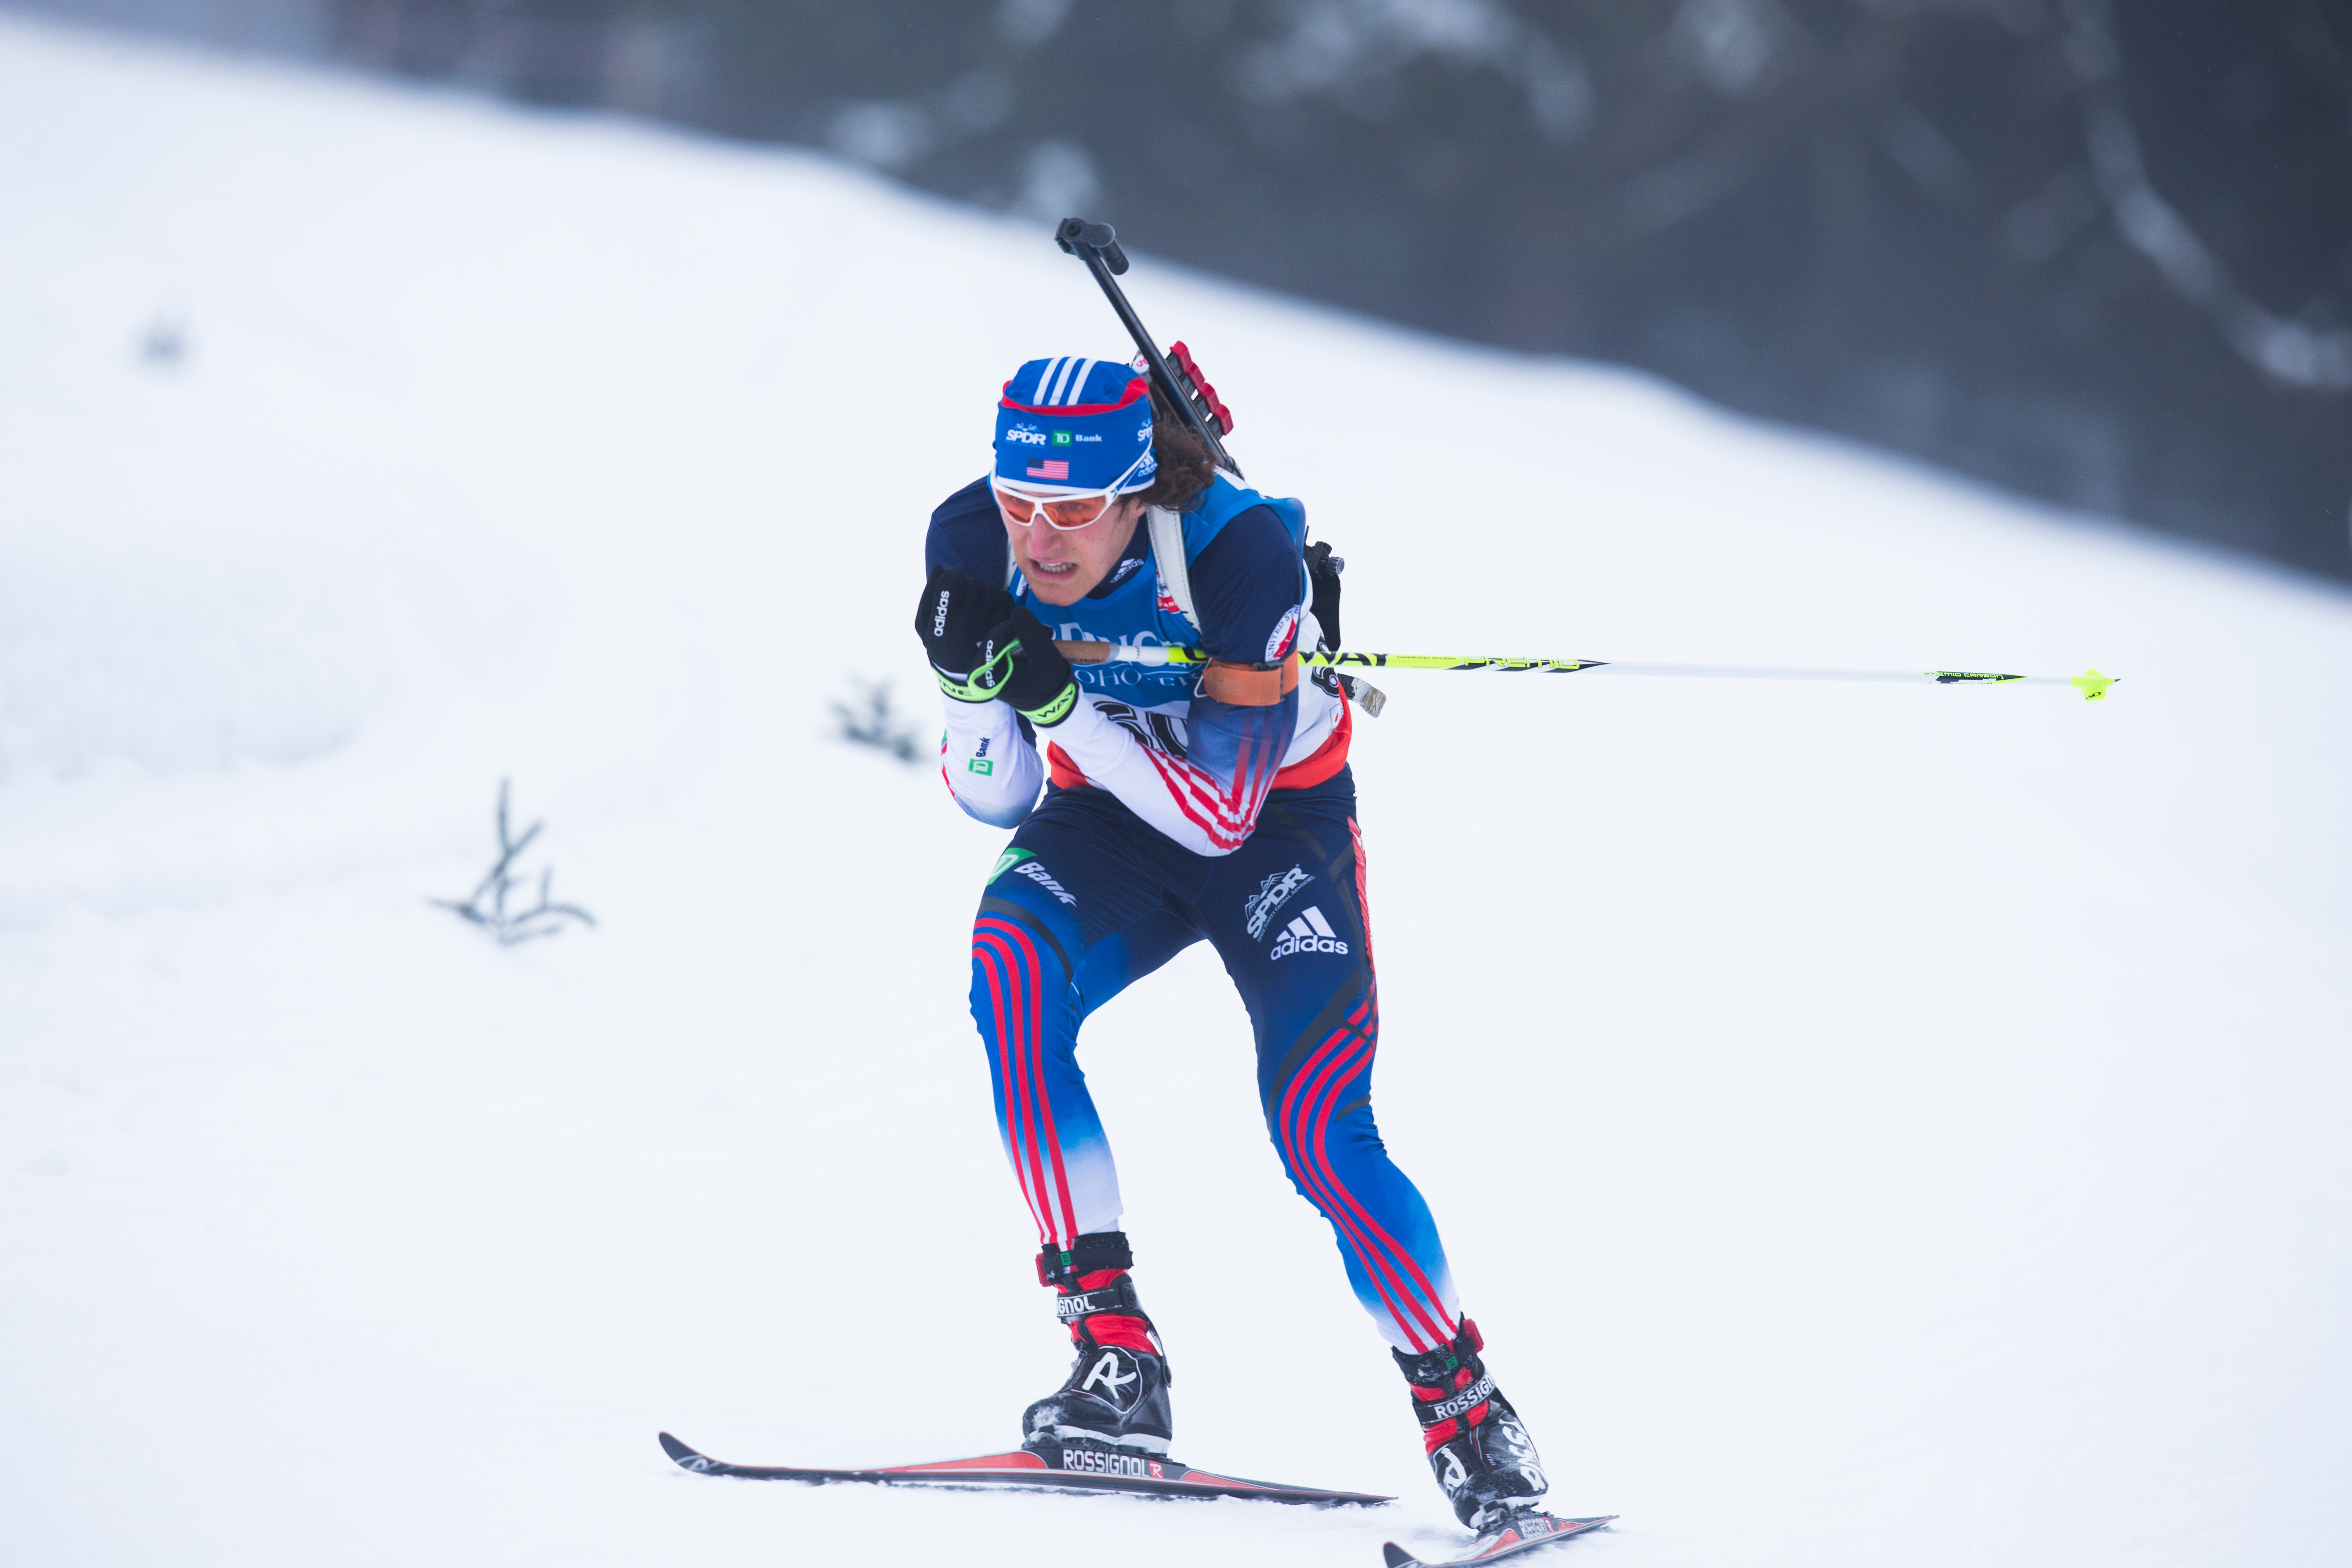 Maine Biathletes Reel from Dual Cuts from MWSC Downsizing, U.S. National Team Roster